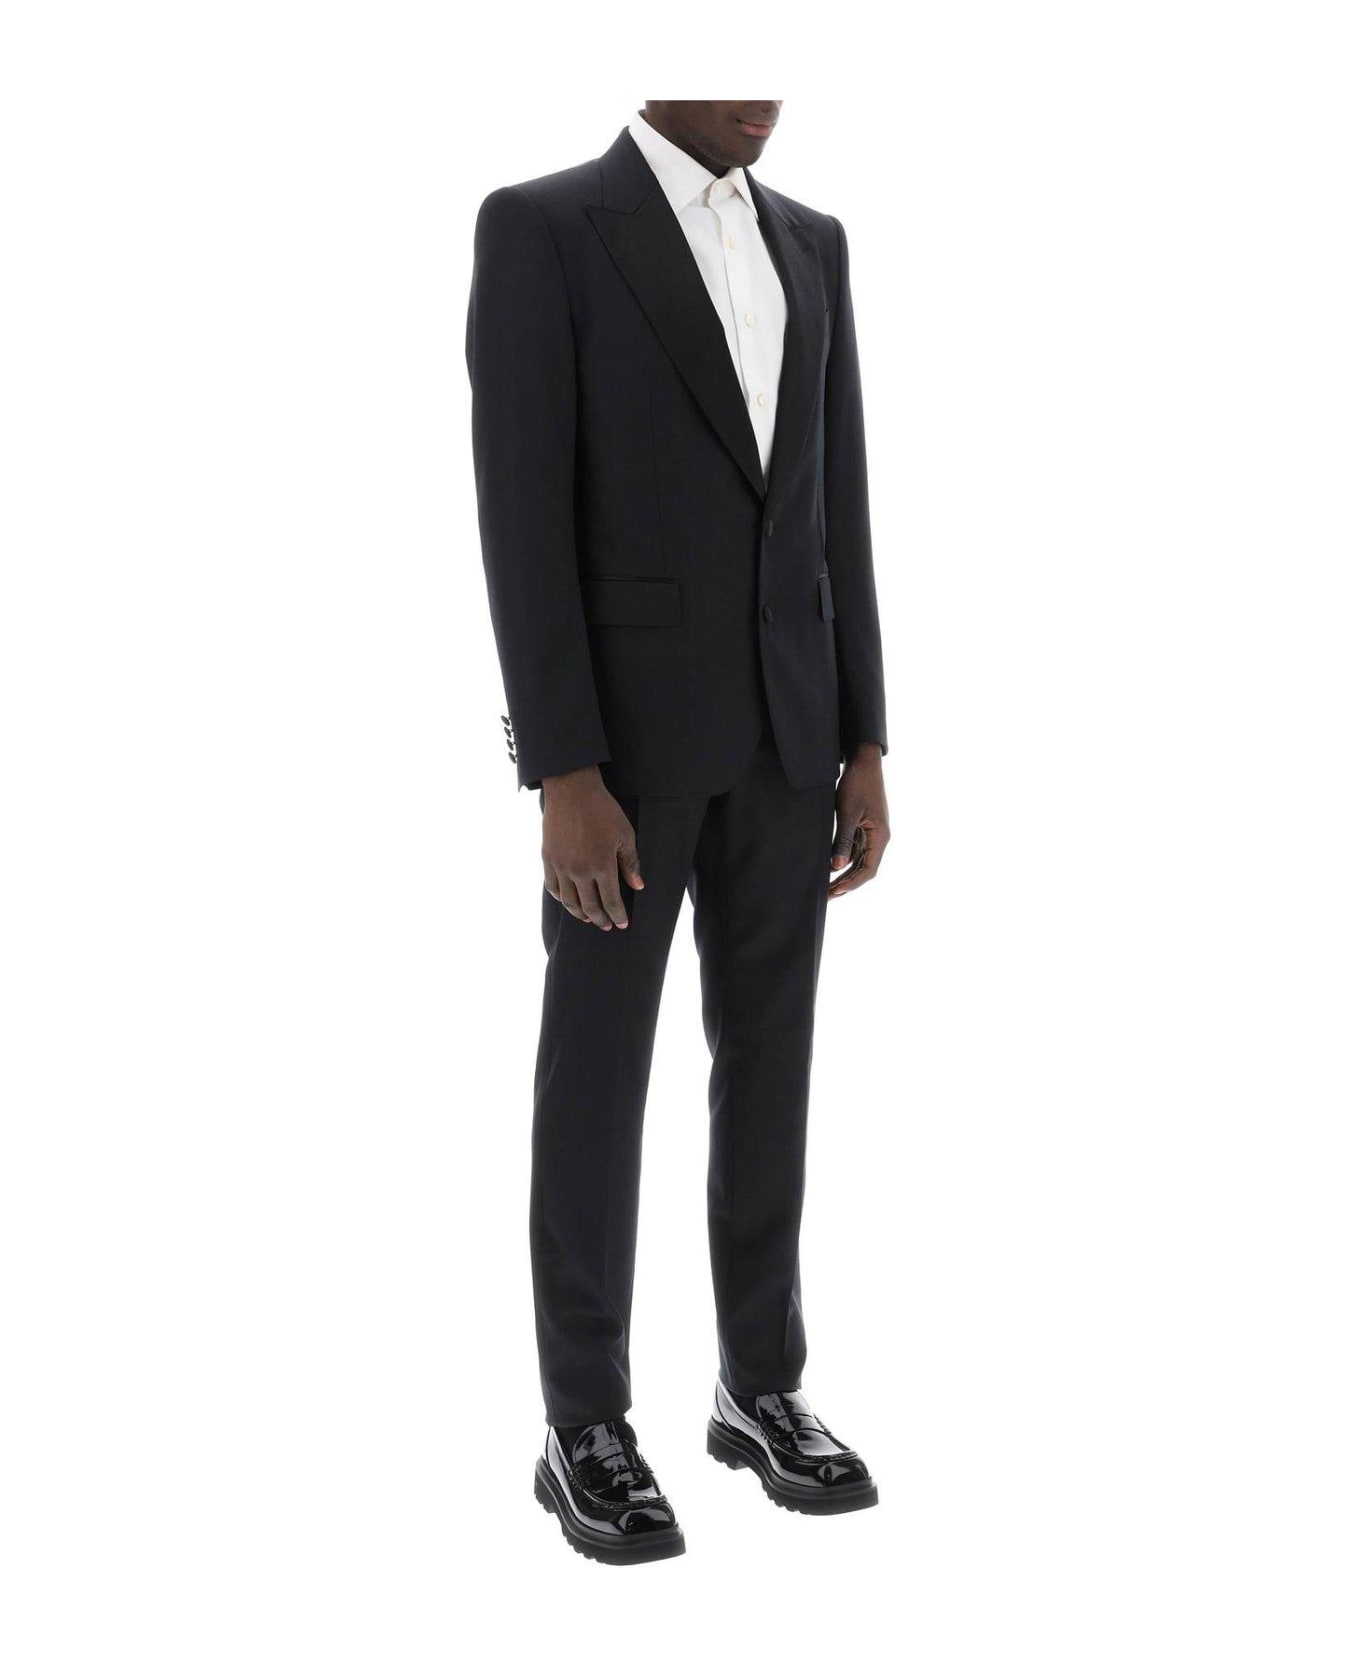 Dolce & Gabbana Single-breasted Pressed Crease Tailored Suit